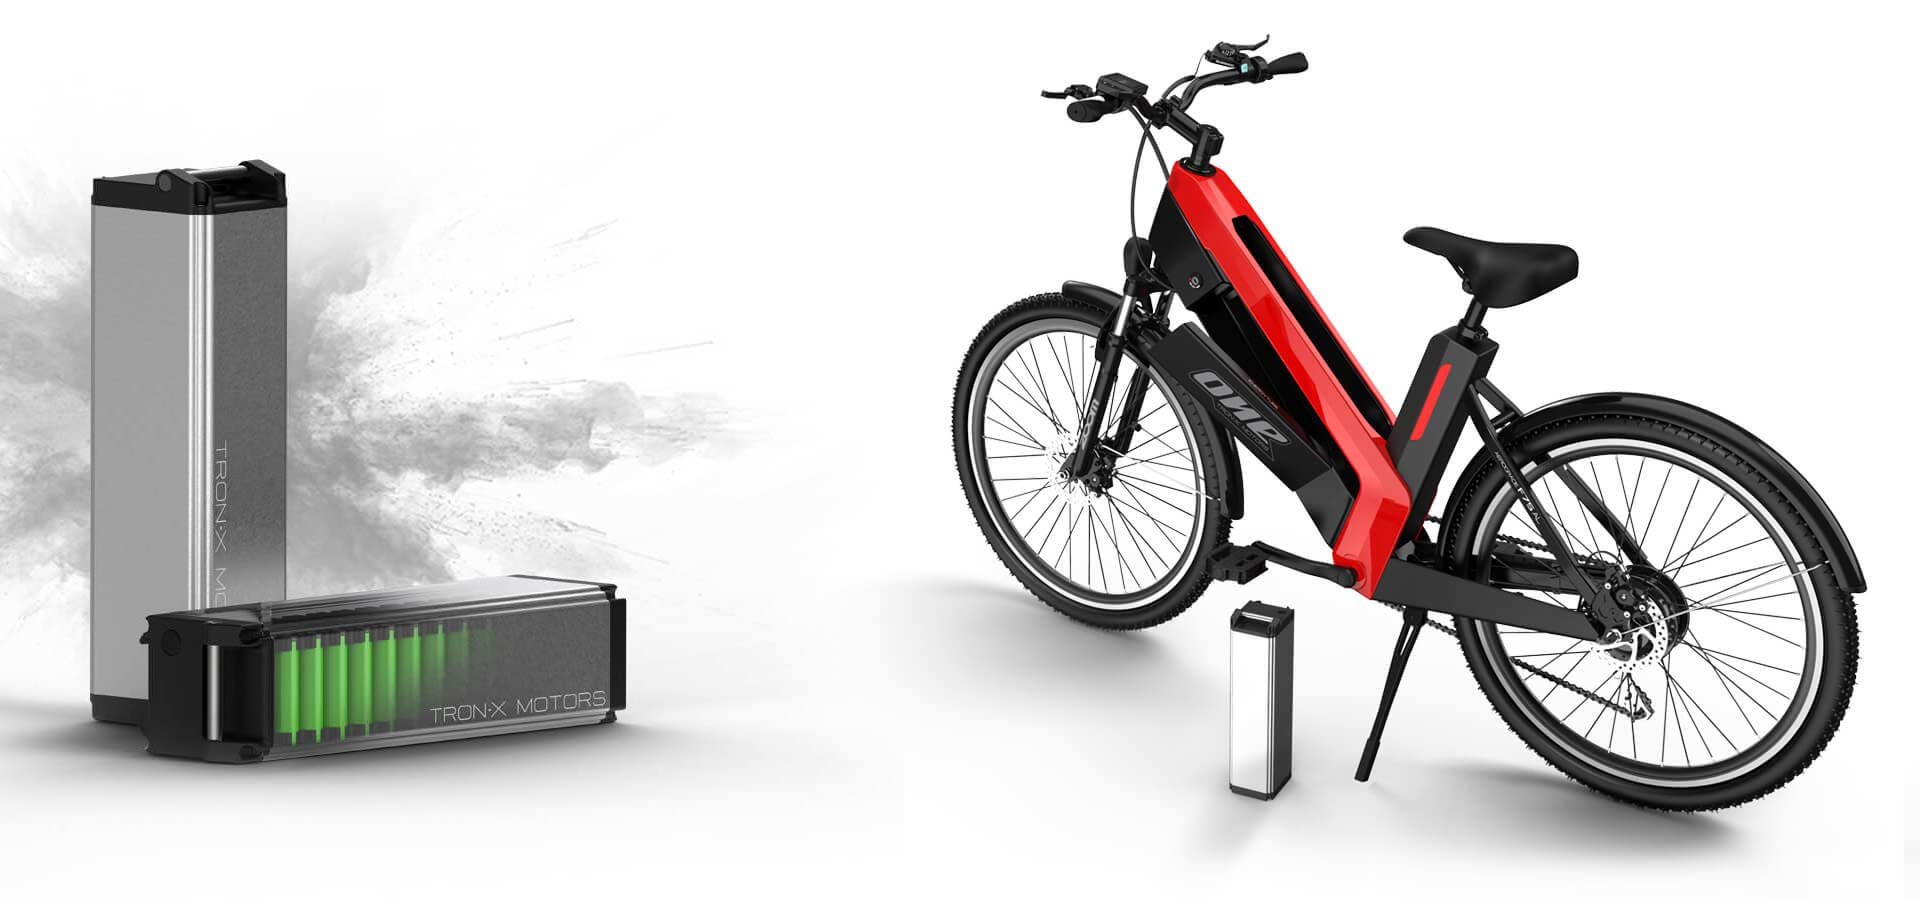 tronx one electric cycle